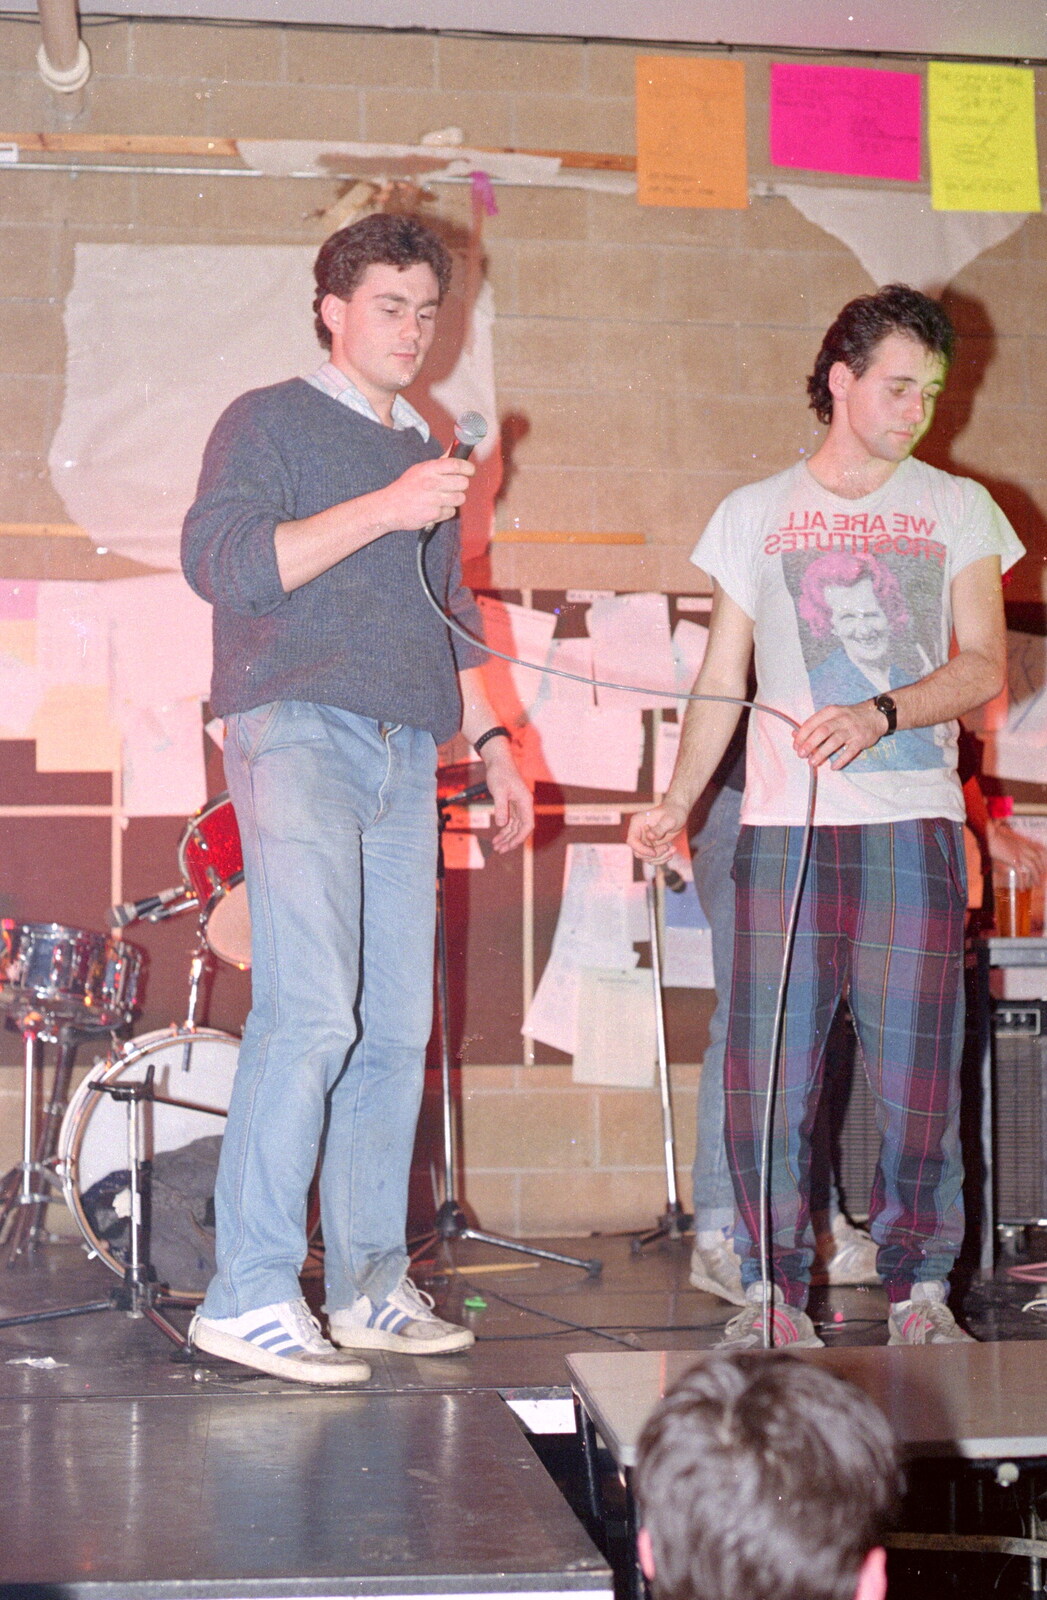 Martin's on the mic from Uni: The PPSU "Jazz" RAG Review and Charity Auction, Plymouth, Devon - 19th February 1986